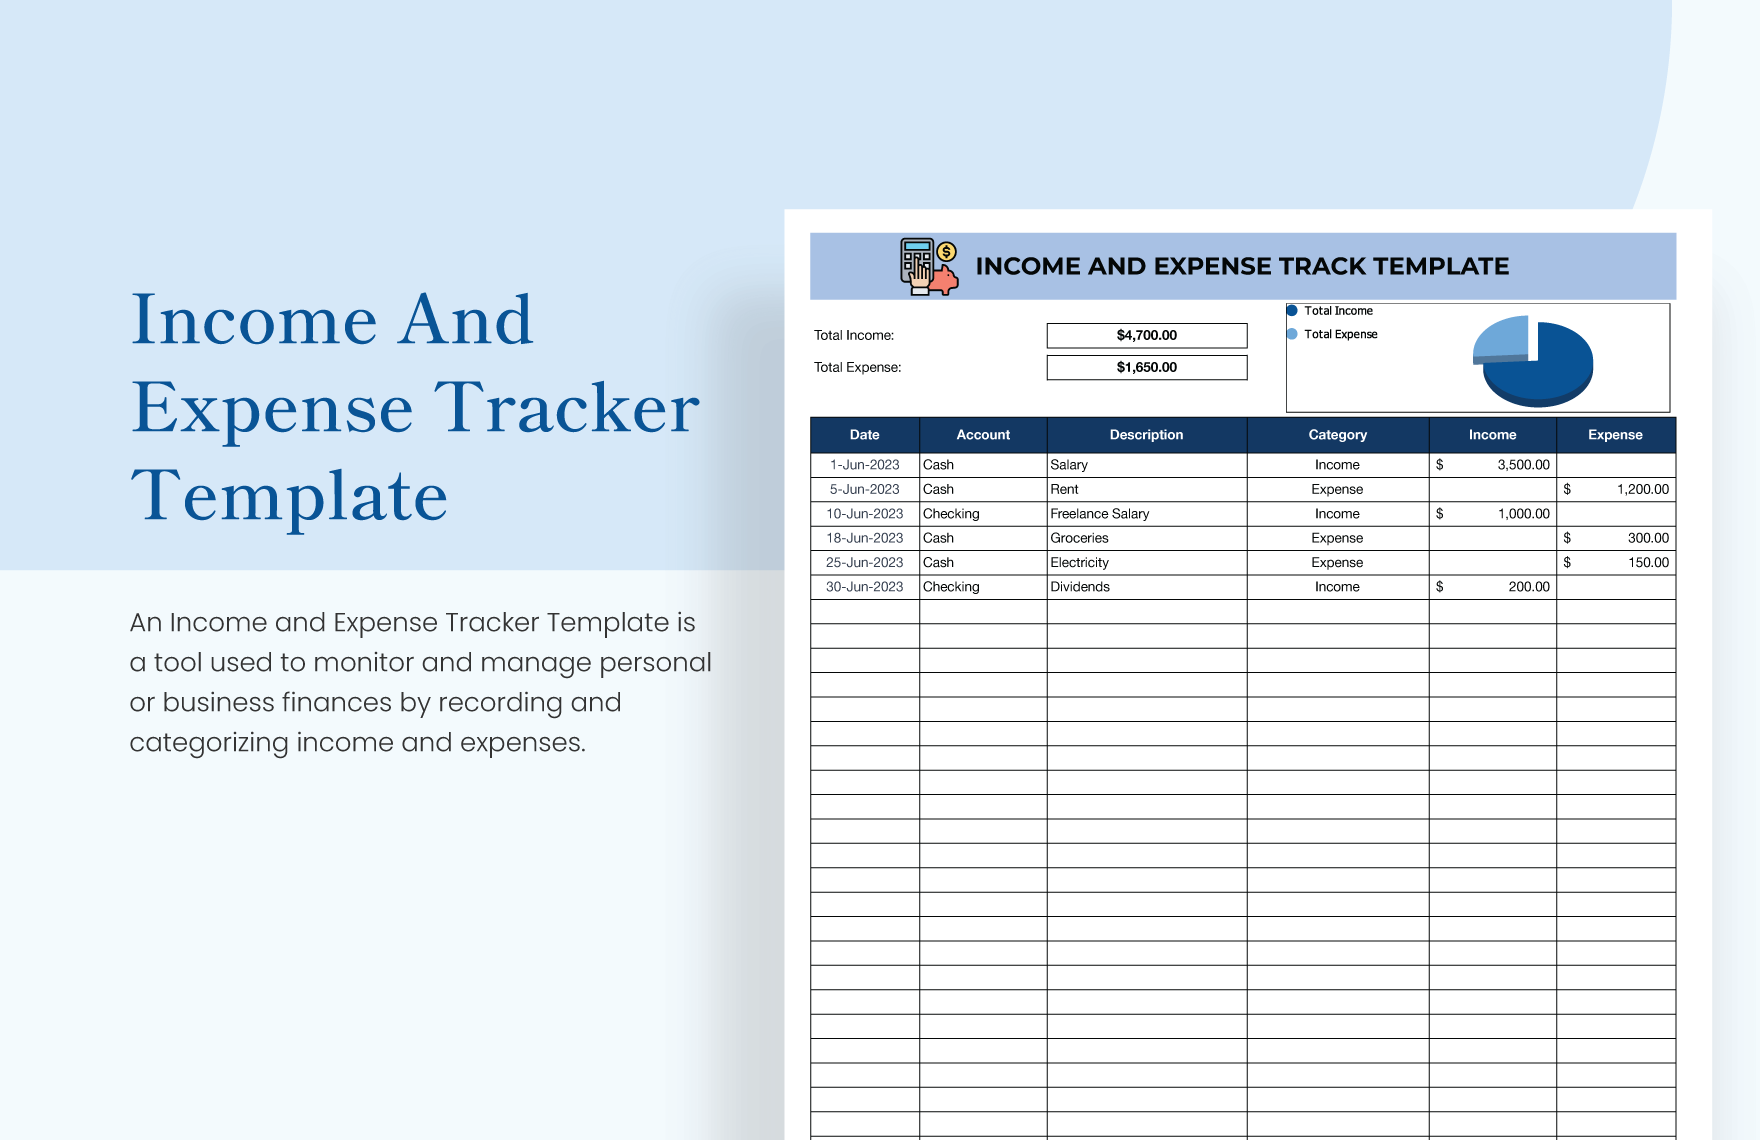 Income and Expense Tracker Template